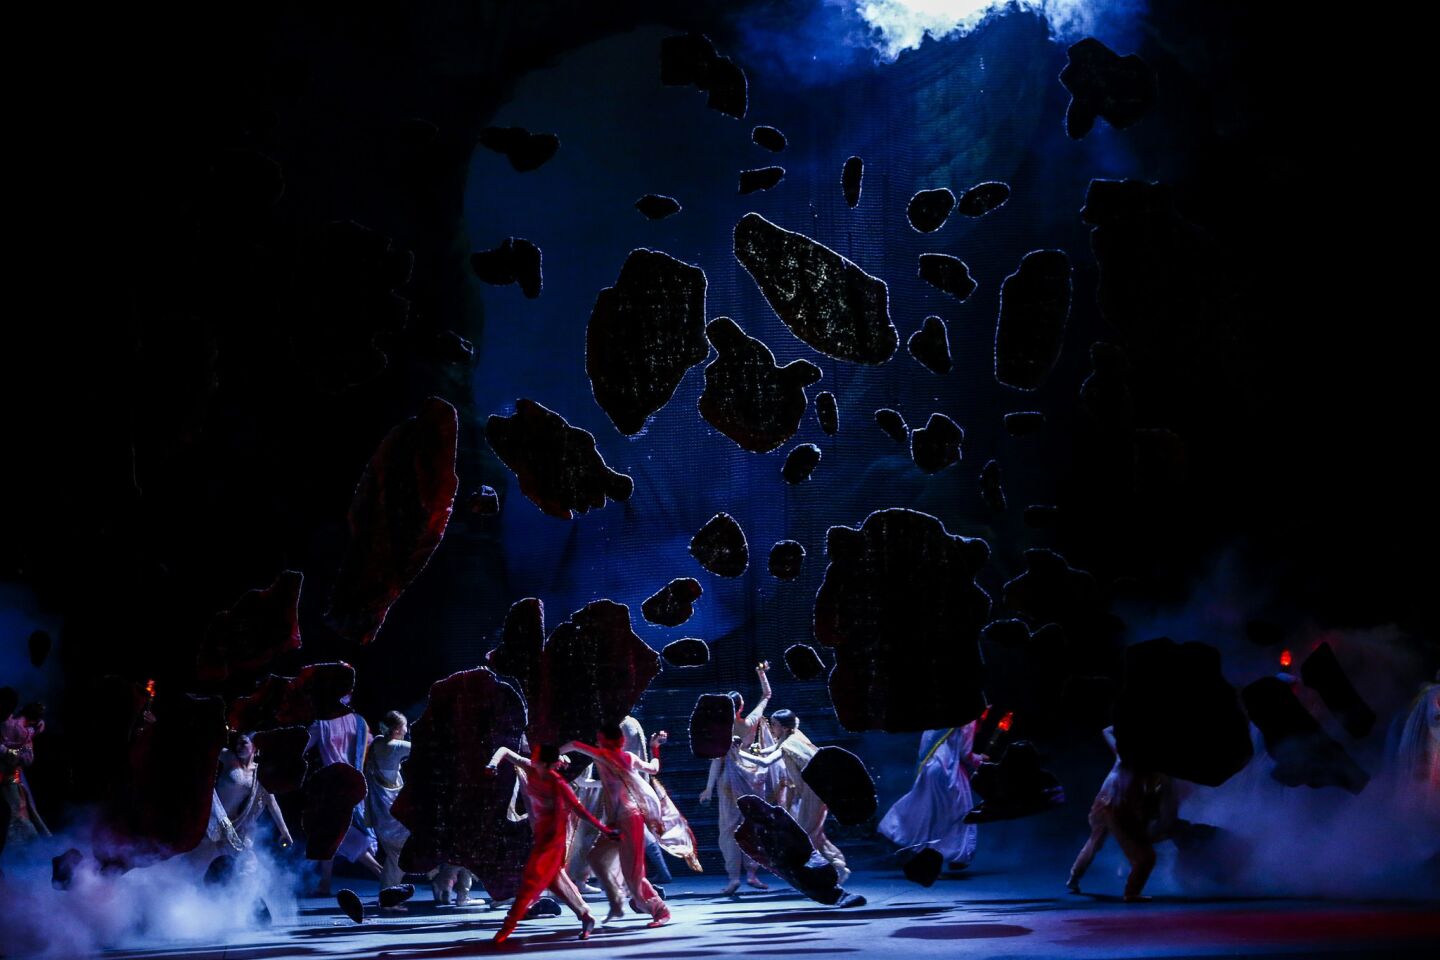 American Ballet Theatre performs "La Bayadere" at the Music Center's Dorothy Chandler Pavillion in Los Angeles.